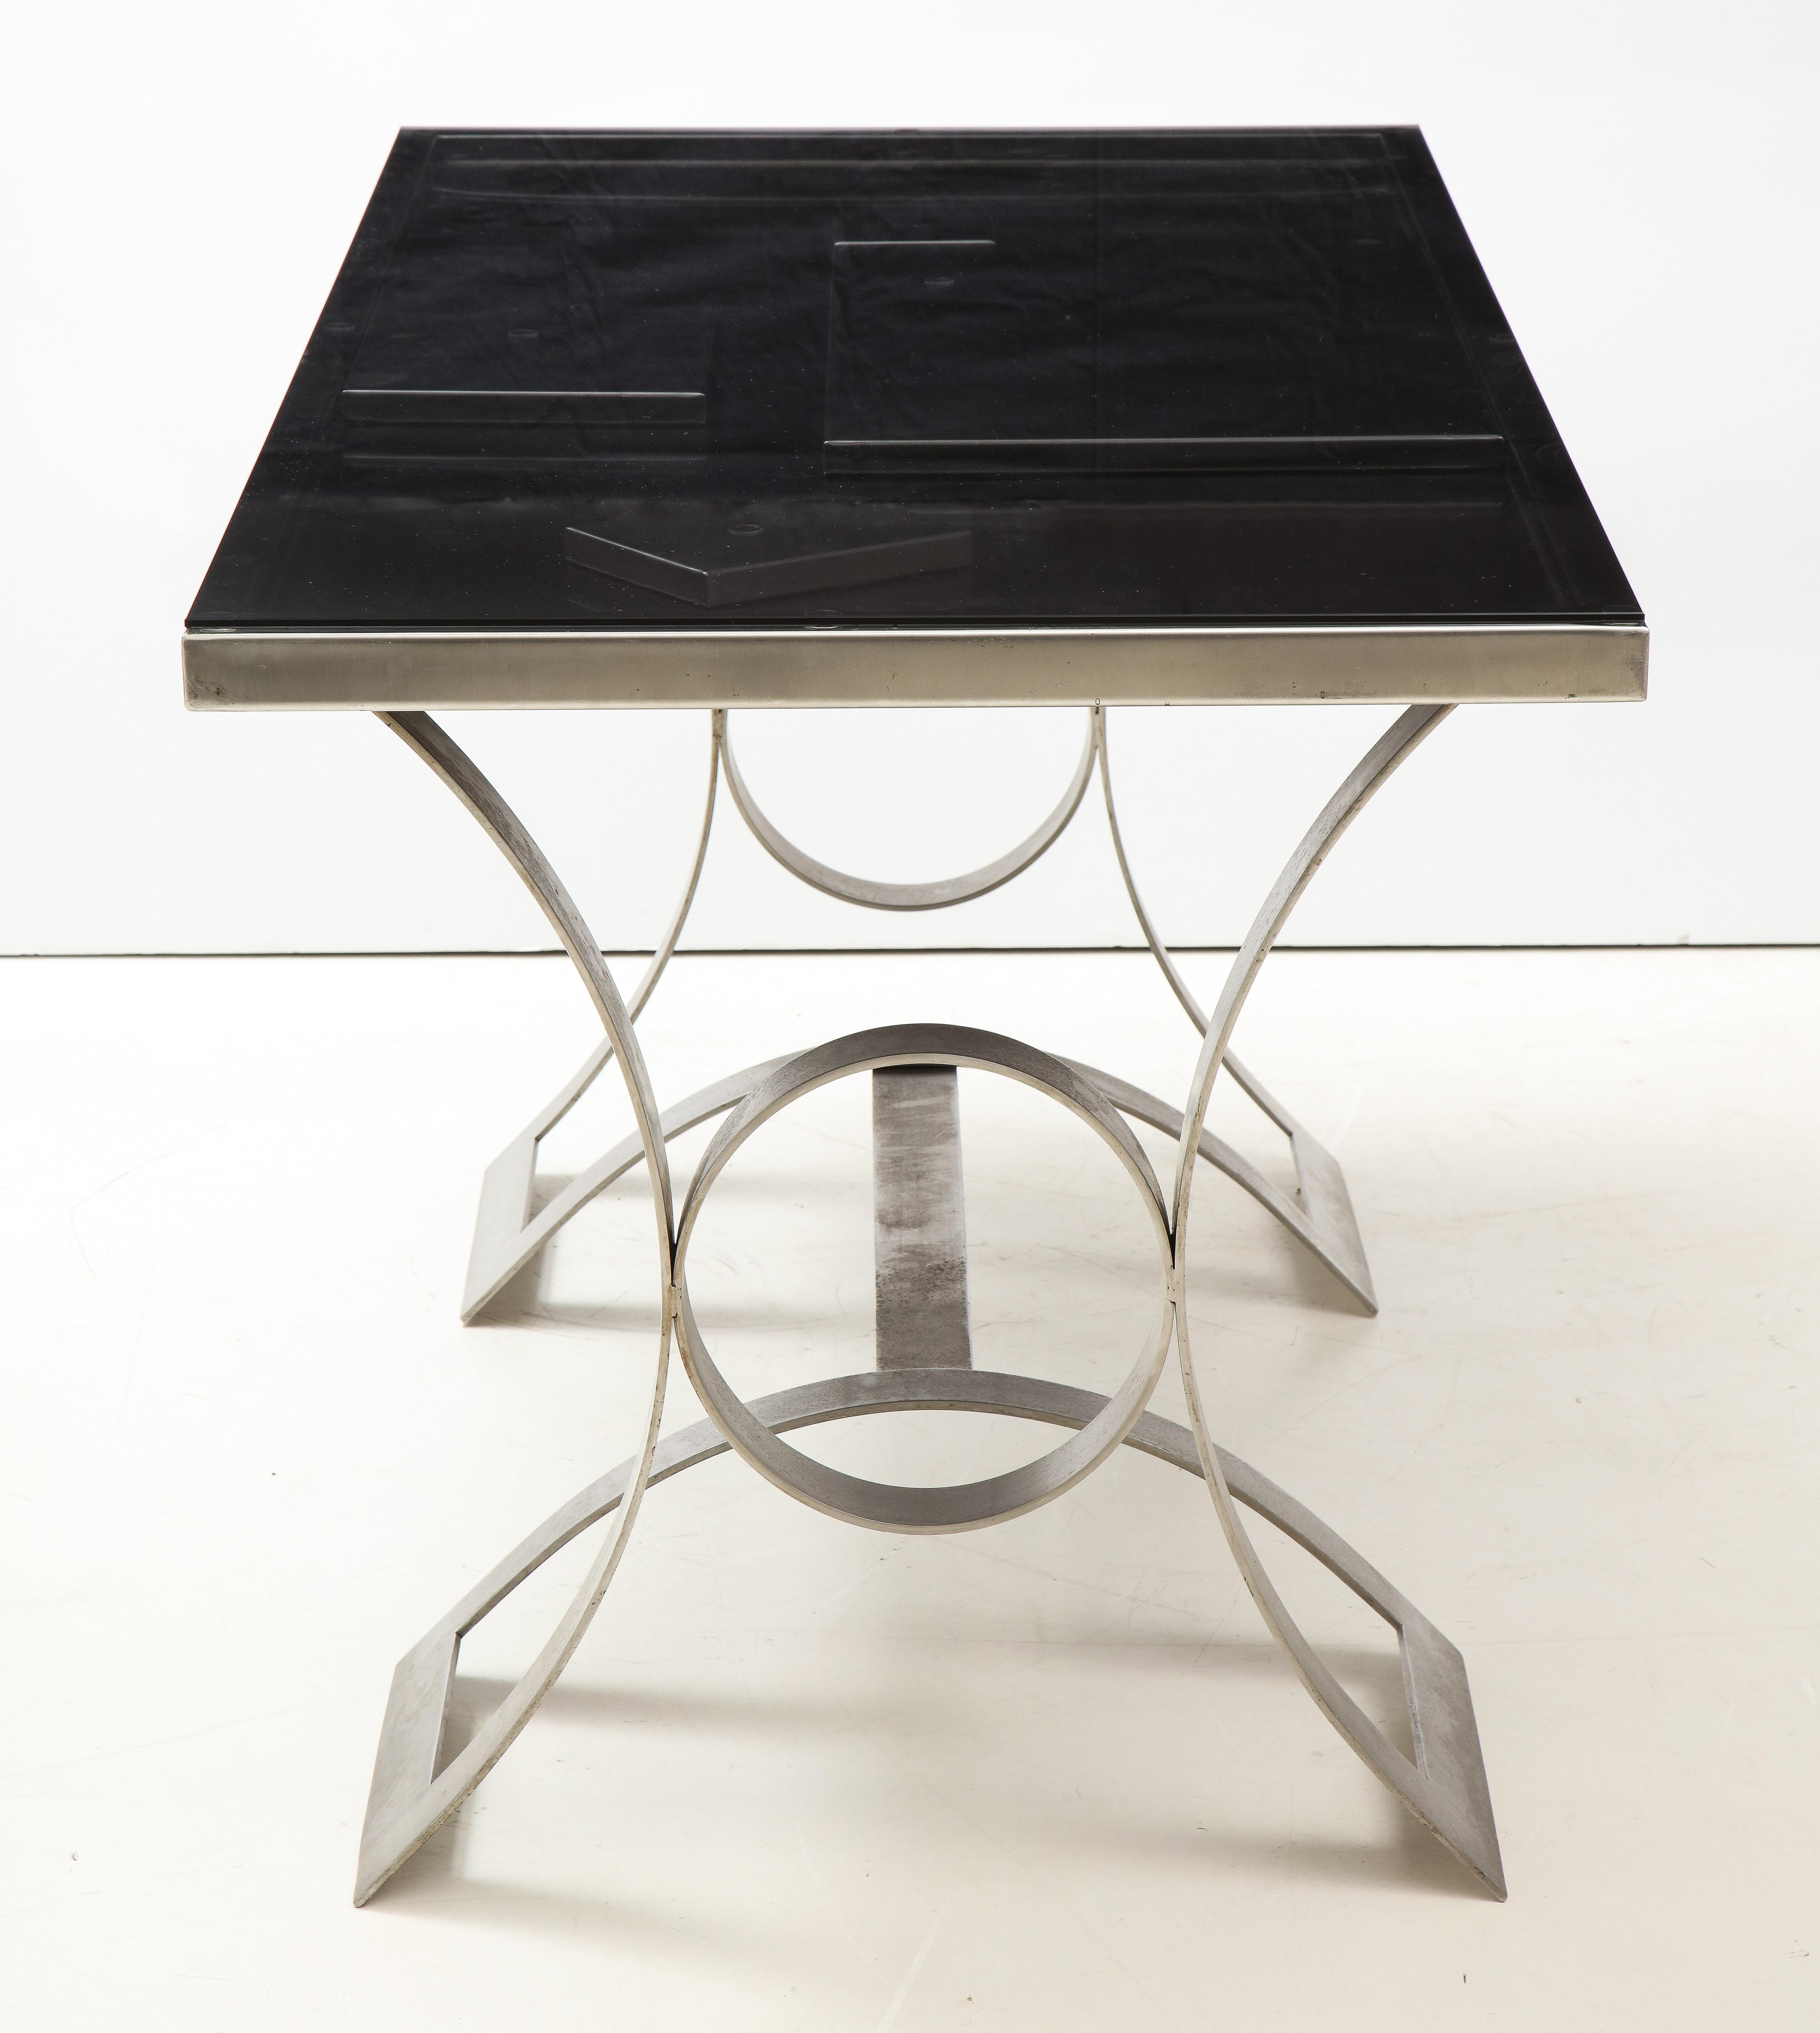 Rare Stainless Steel Desk with Smoked Grey Glass Top, France, c. 1970 For Sale 4